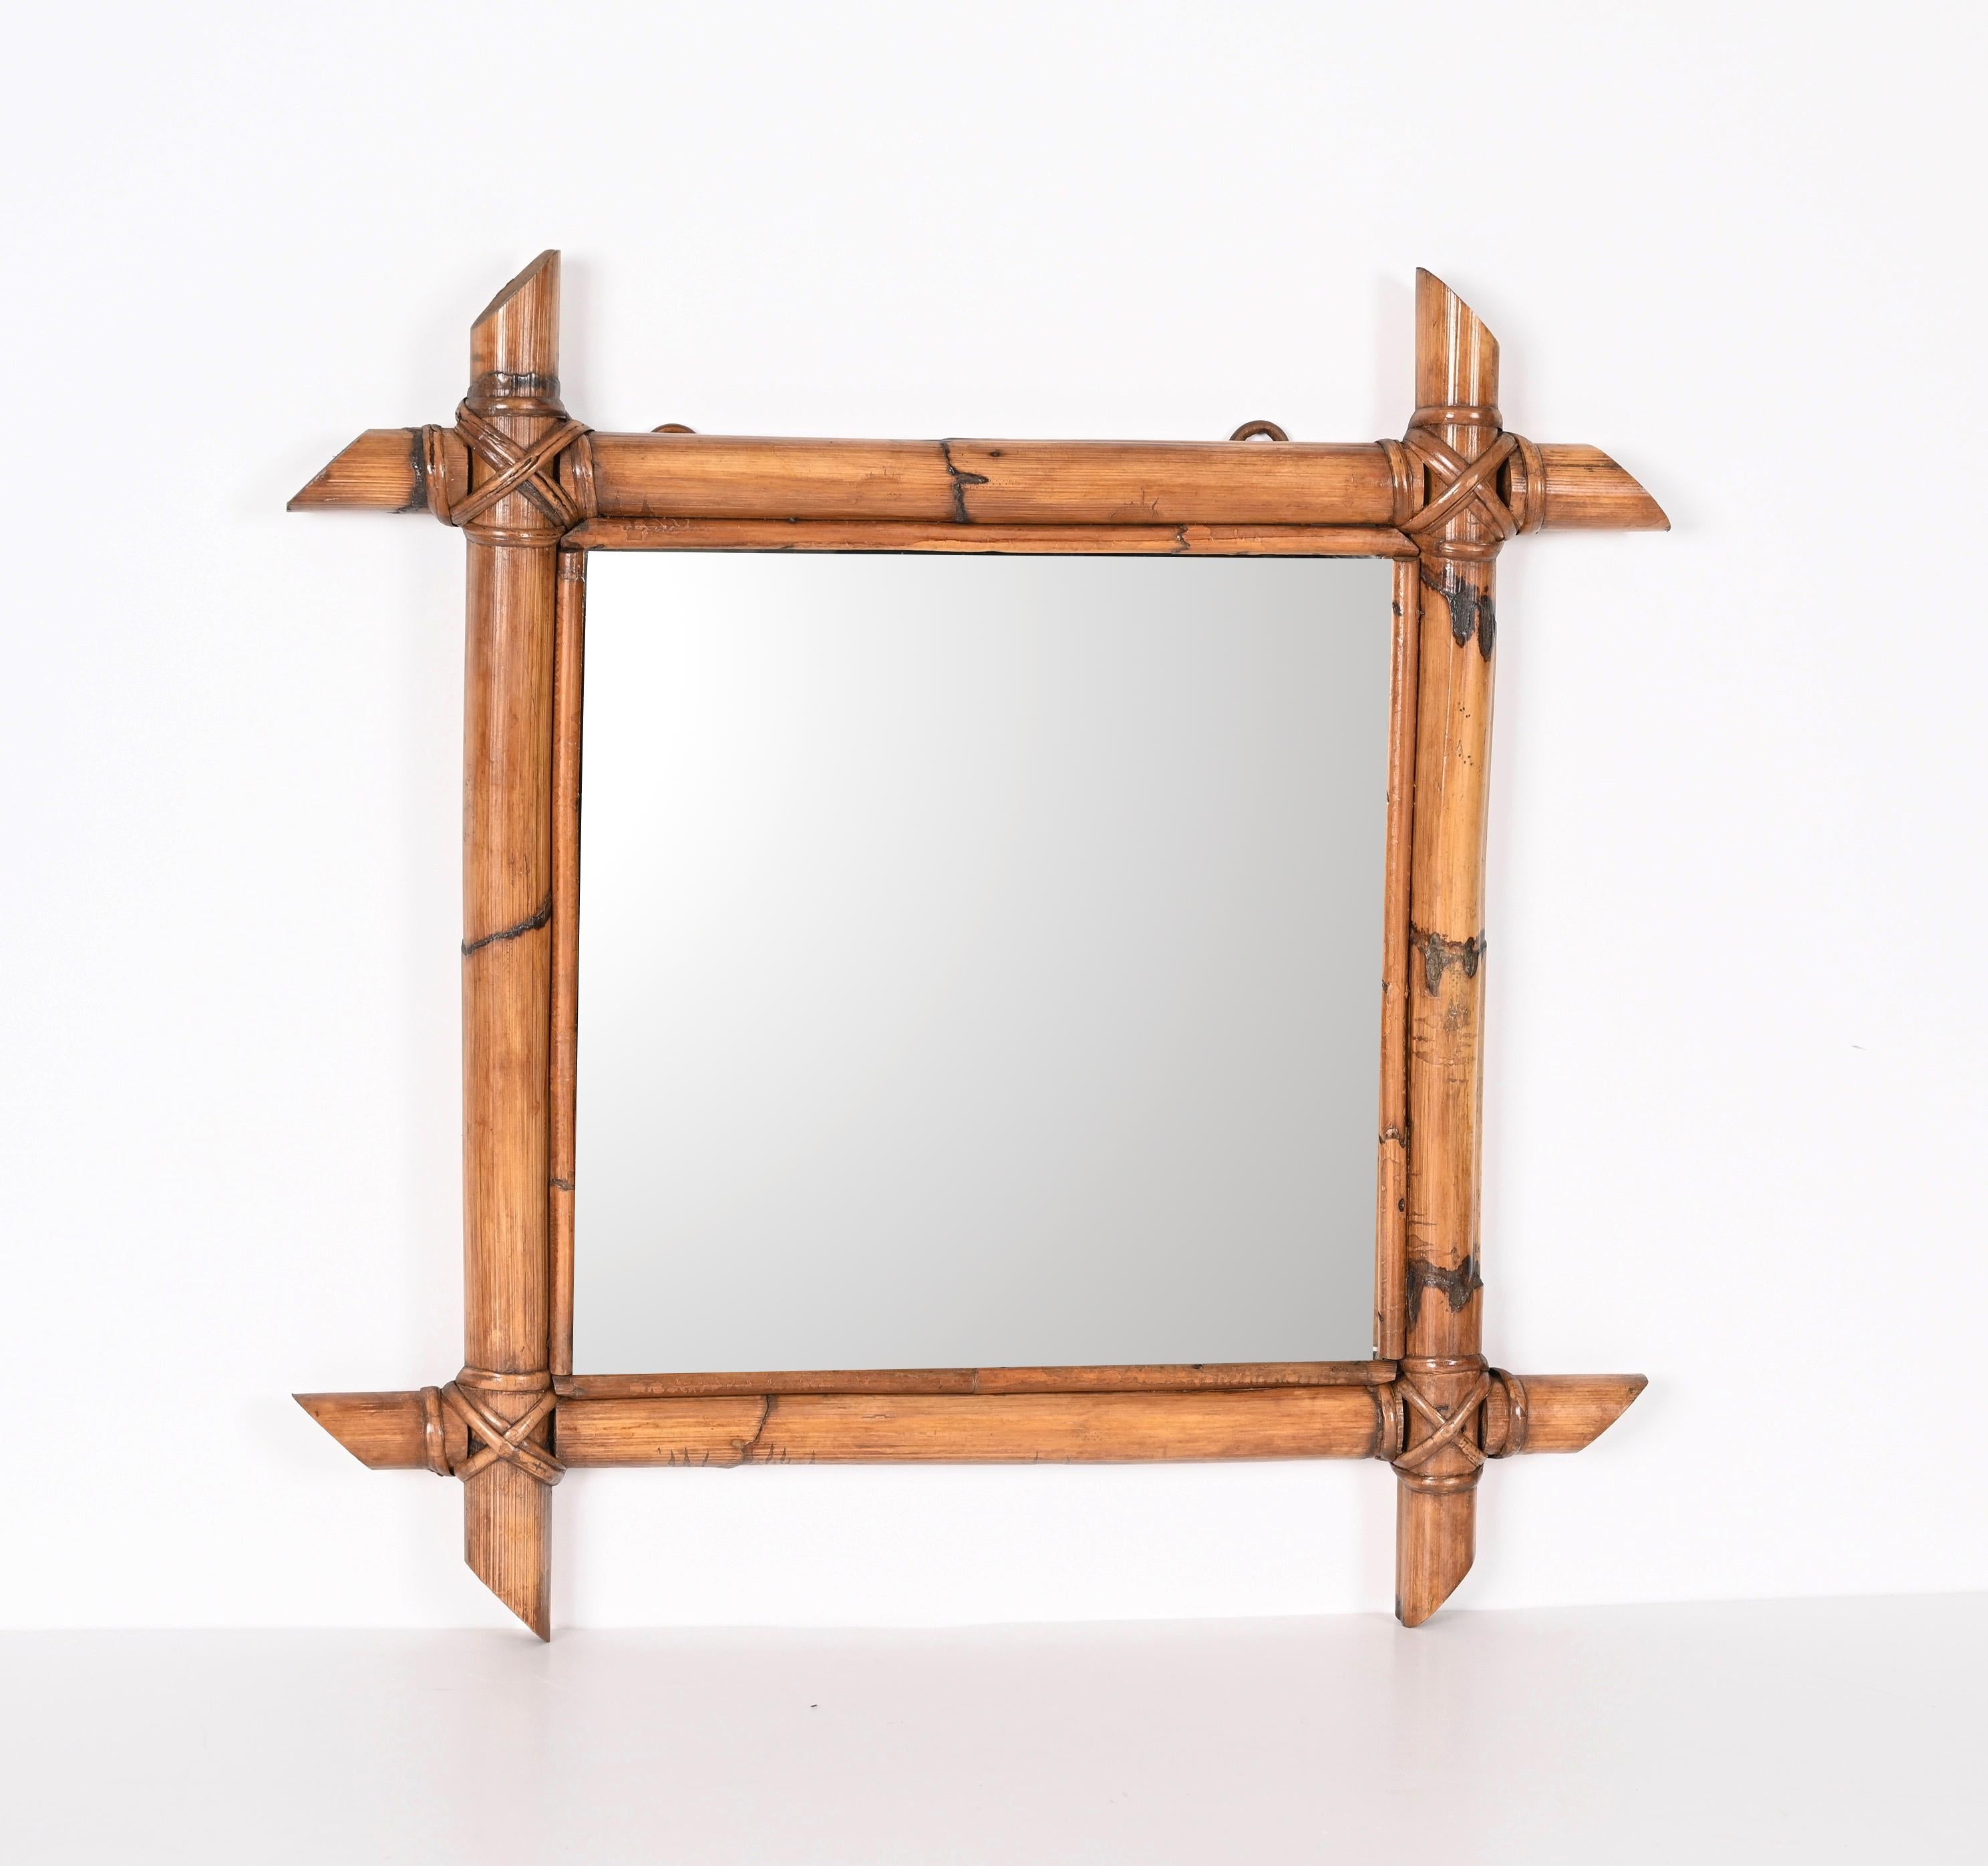 Midcentury Square Italian Mirror with Bamboo Woven Wicker Frame, 1950s For Sale 2